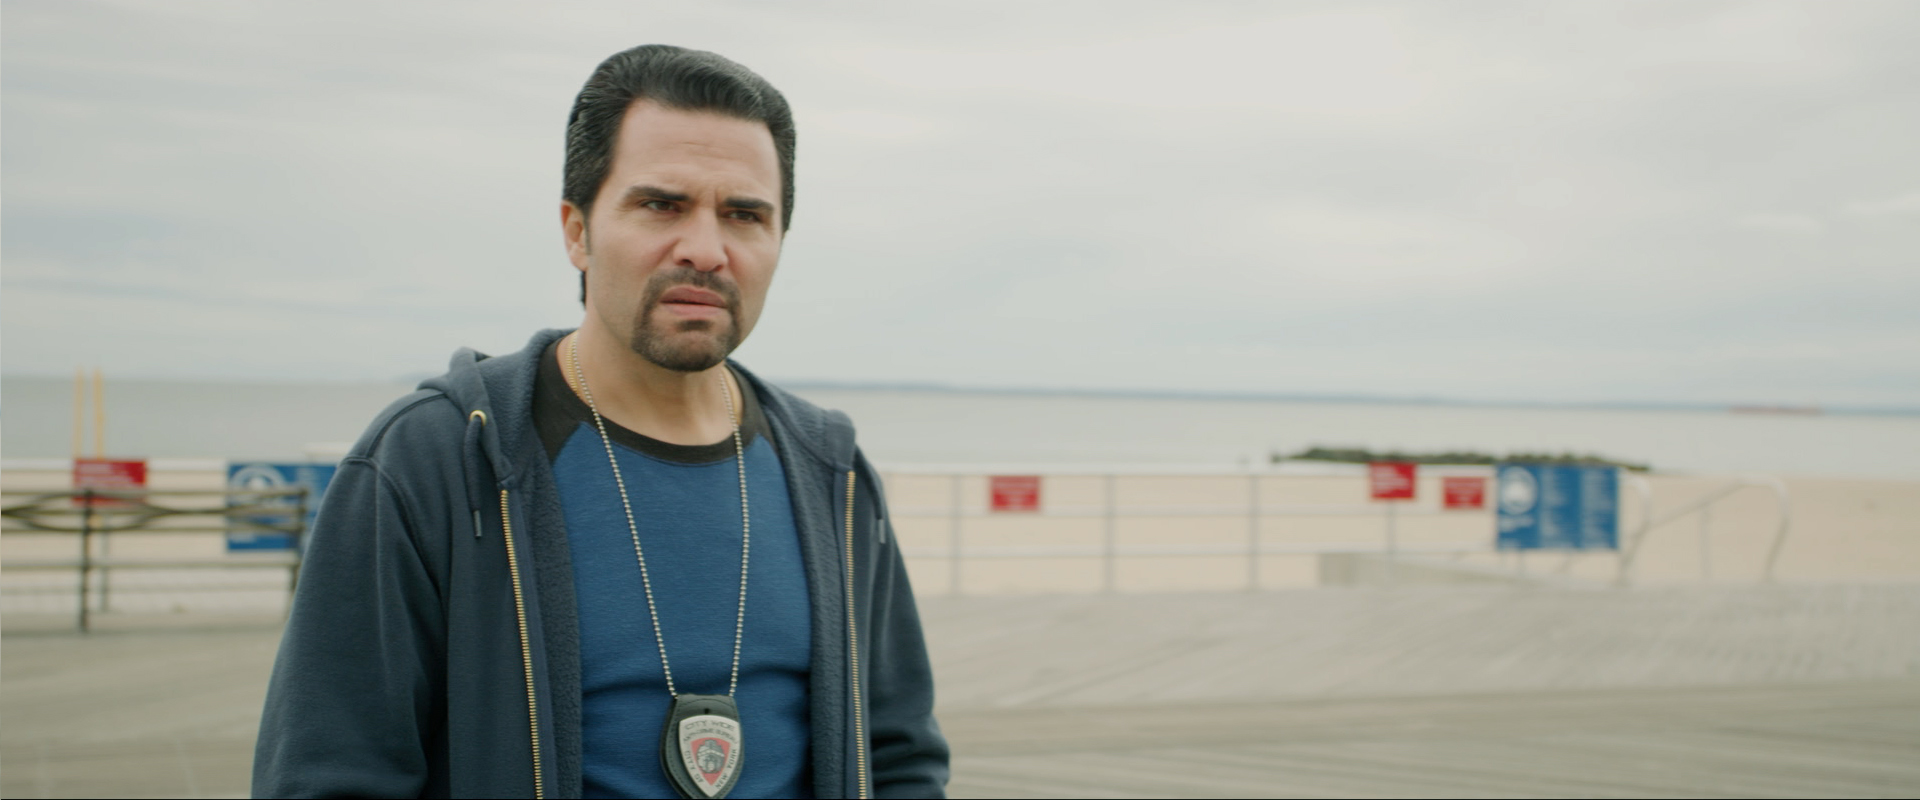 Manny Perez on Playing Tough Latino in a Cop Show with Big Dogs [Exclusive Interview]